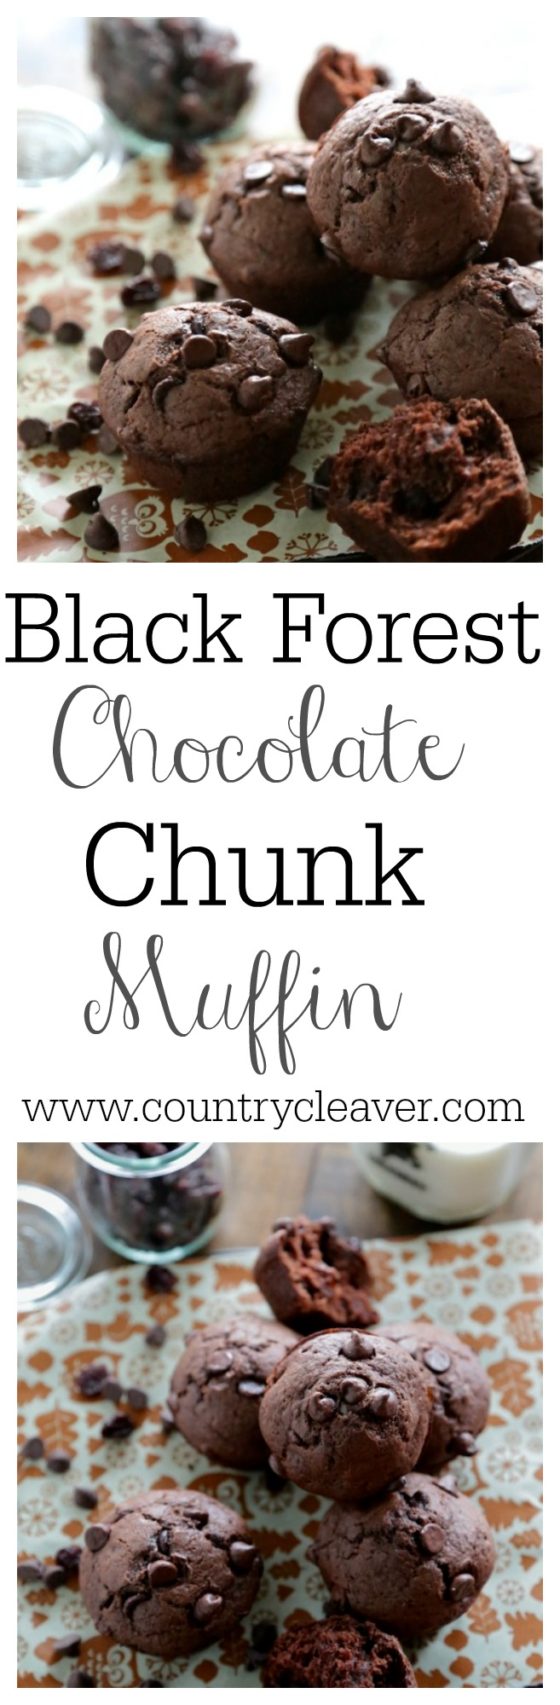 Black Forest Chocolate Chunk Muffin